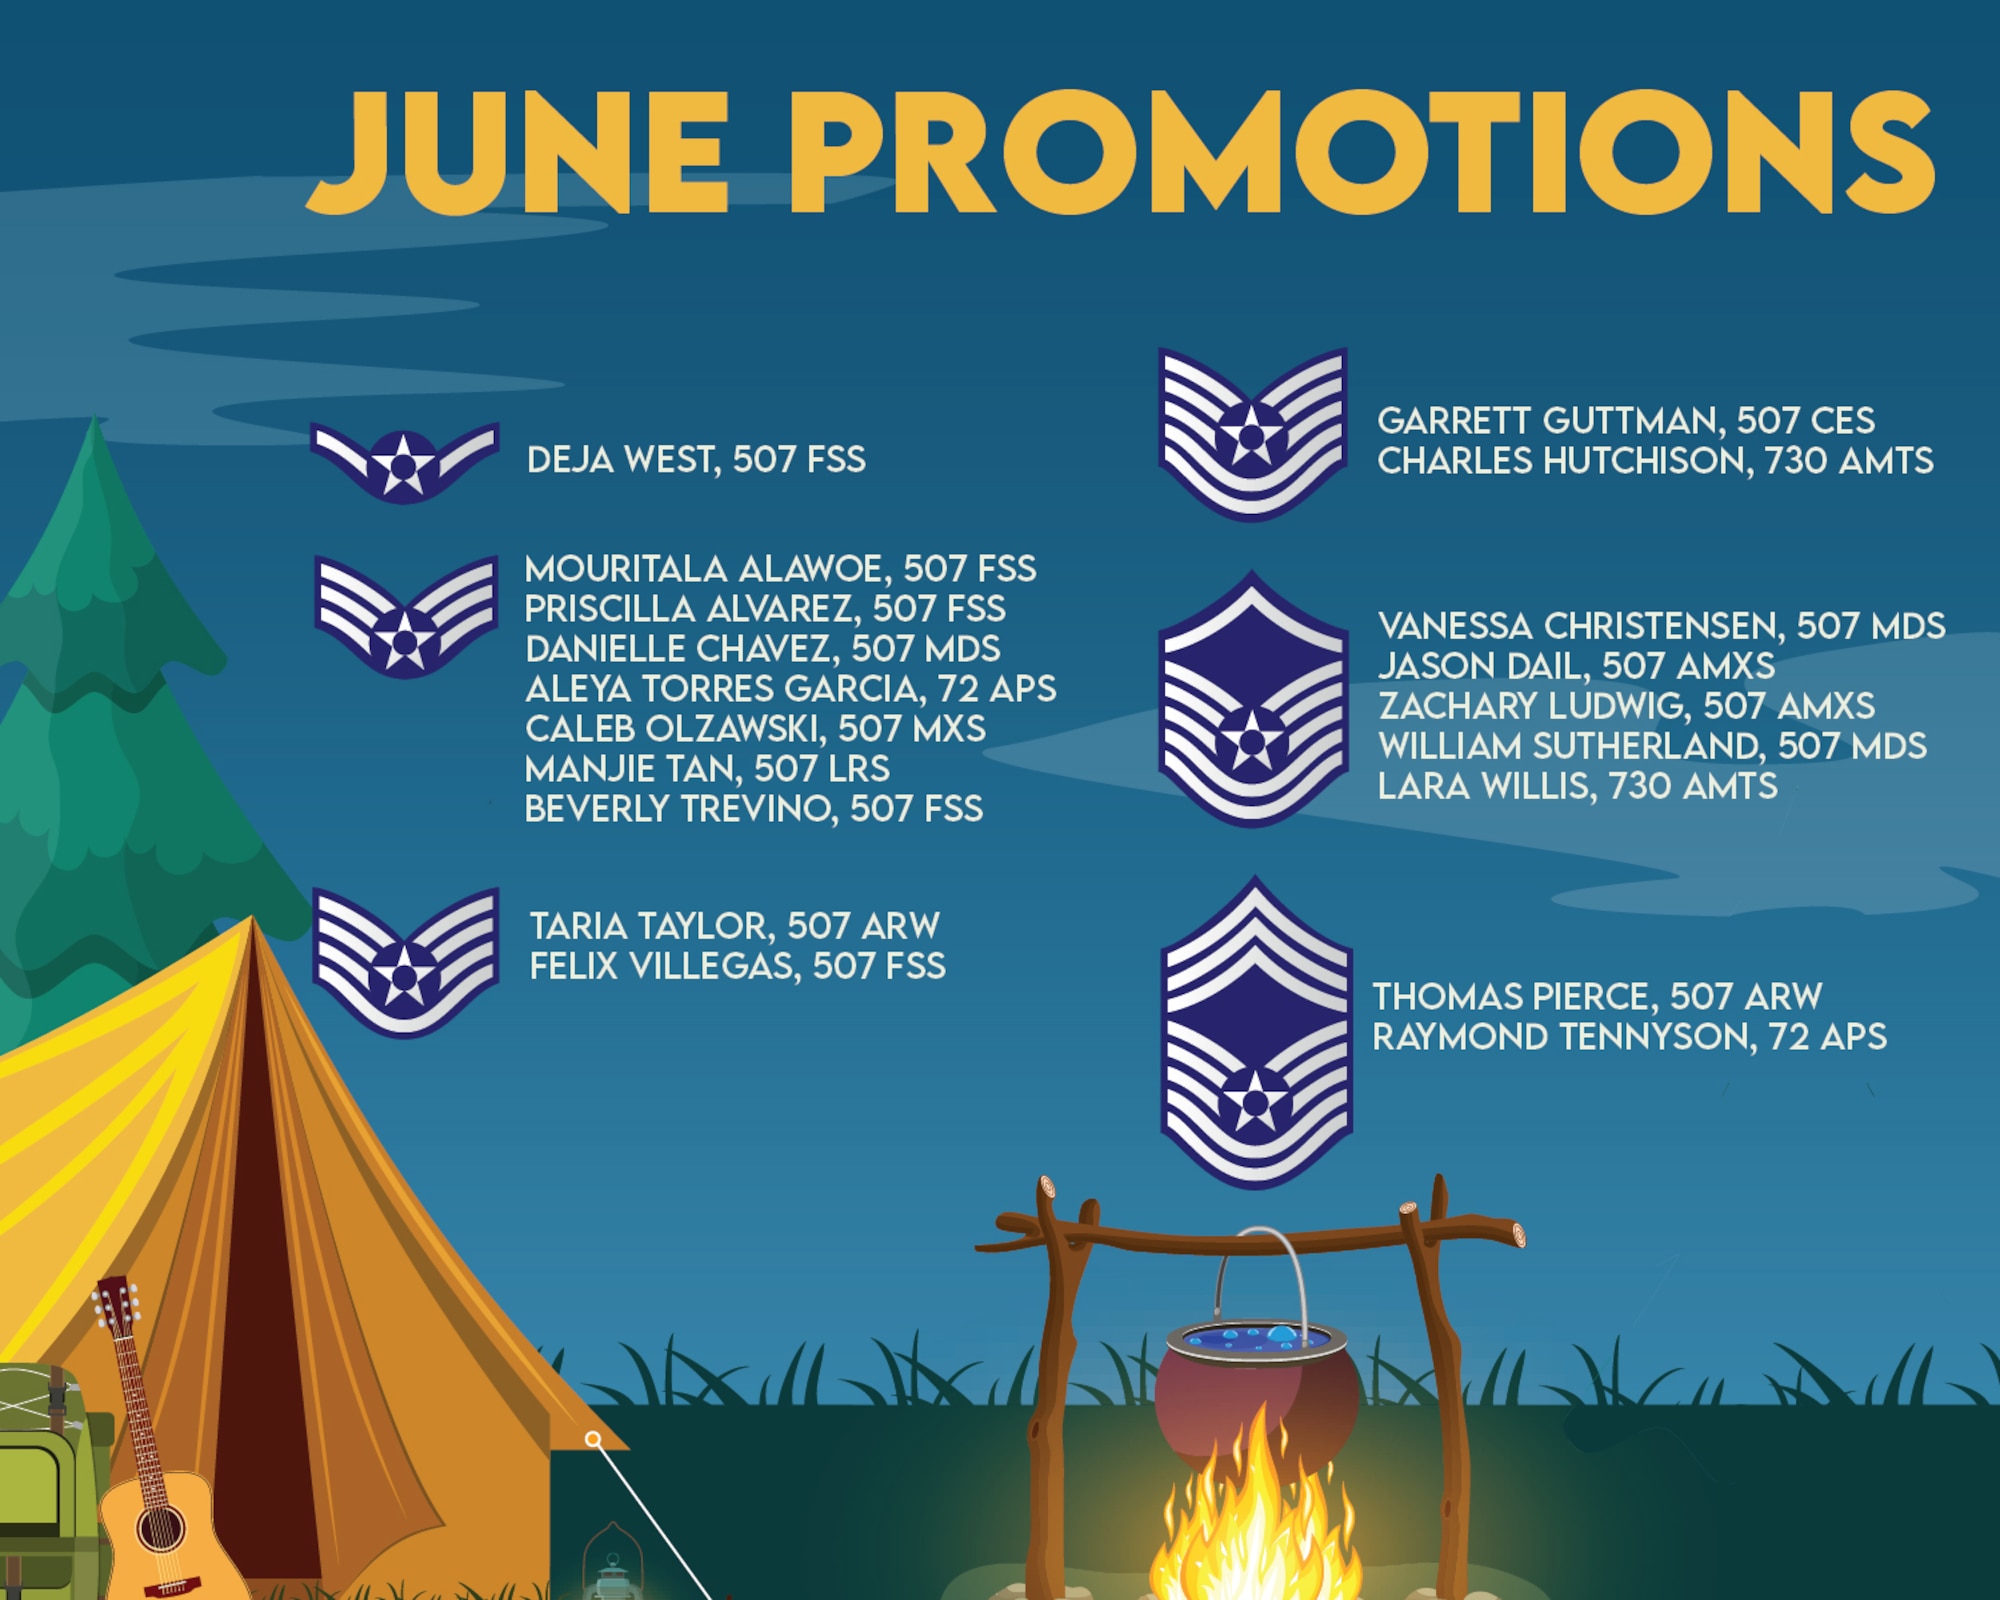 The June enlisted Promotions graphic from the 507th Air Refueling Wing at Tinker Air Force Base, Oklahoma. (U.S. Air Force graphic by Senior Airman Mary Begy)